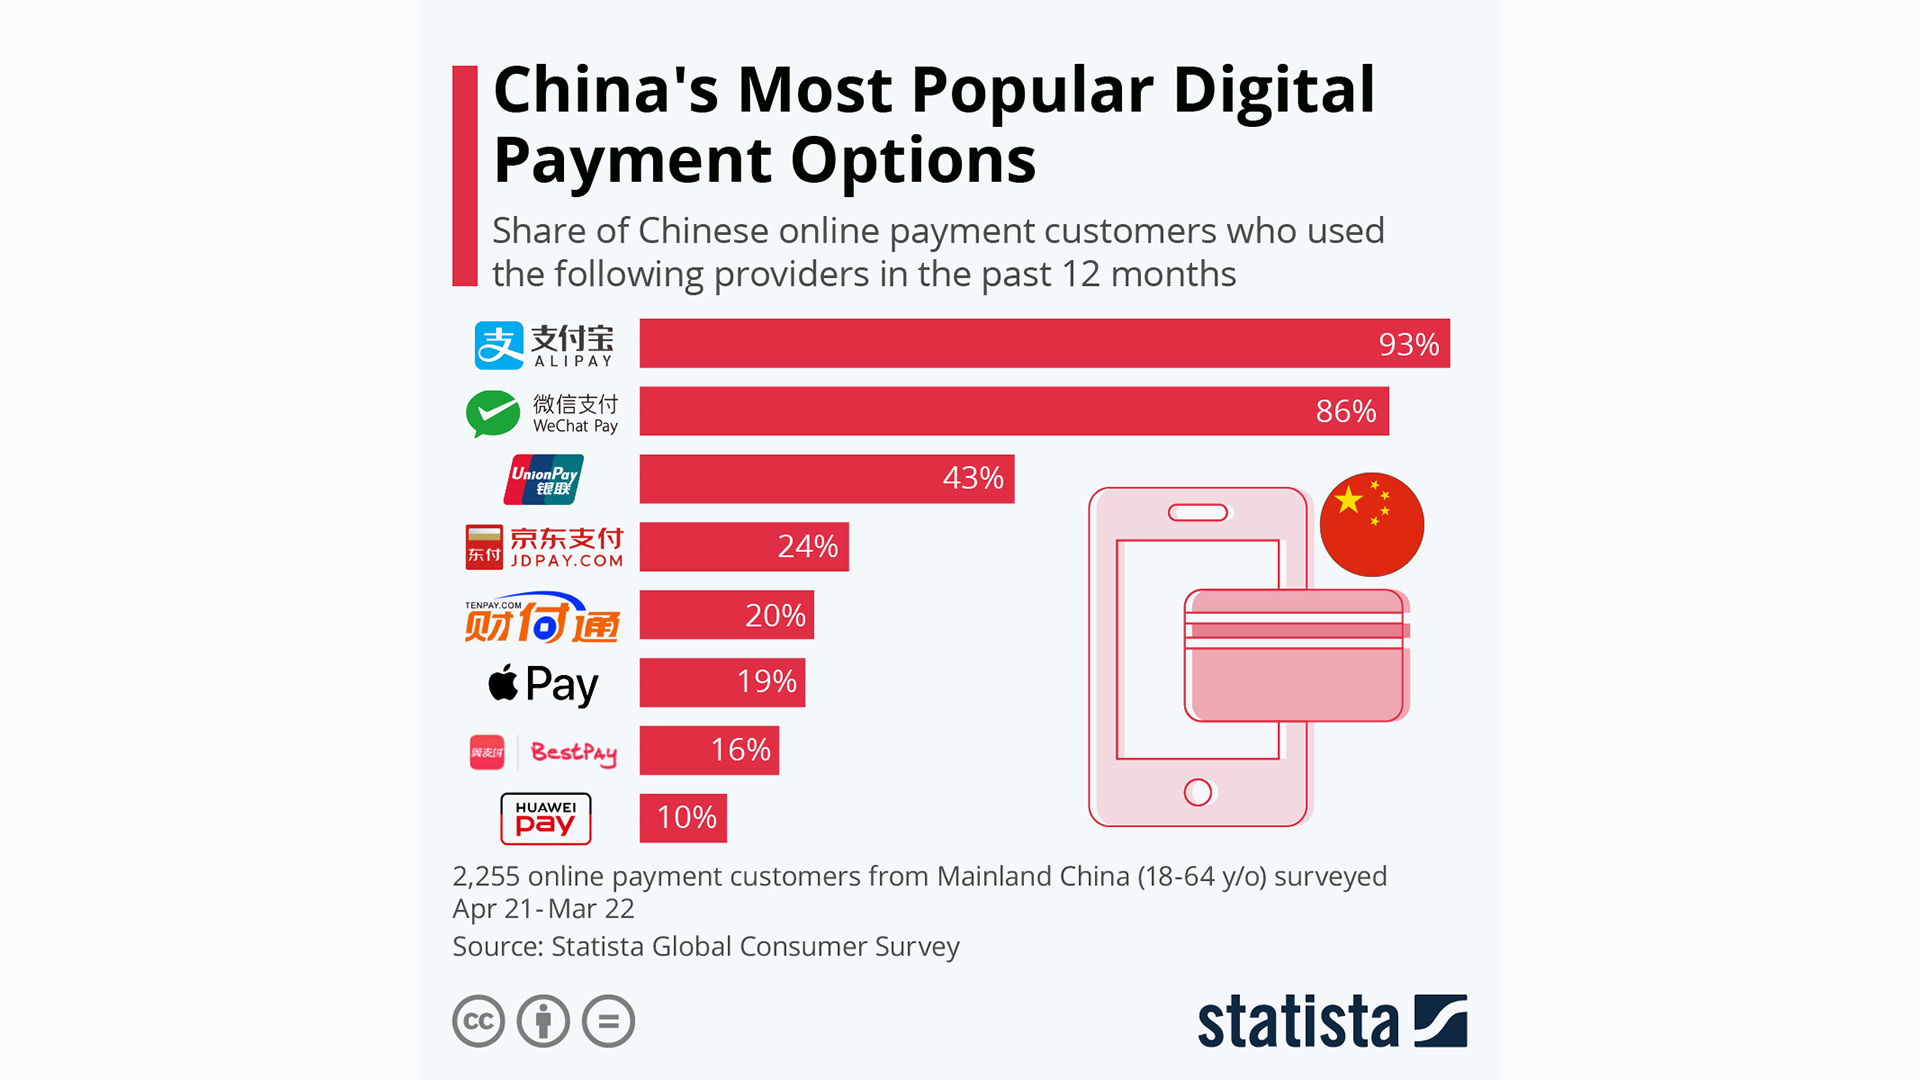 China's most popular Digital Payment Options